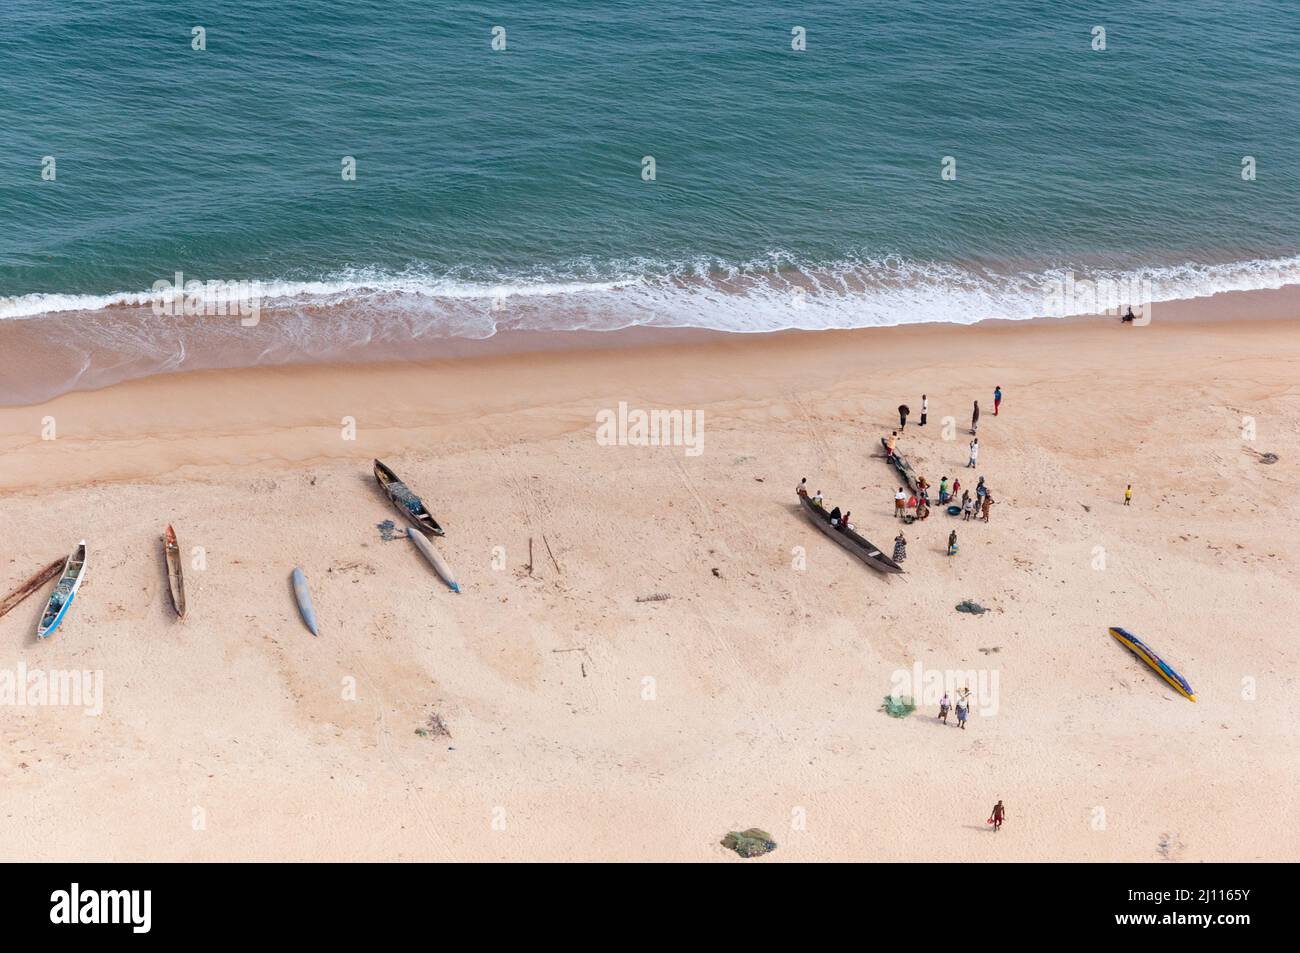 A Liberian beach bustling with activity. Dugout canoes, people and fishing nets captured midday, on a ferry flight from Monrovia to Freetown. Stock Photo